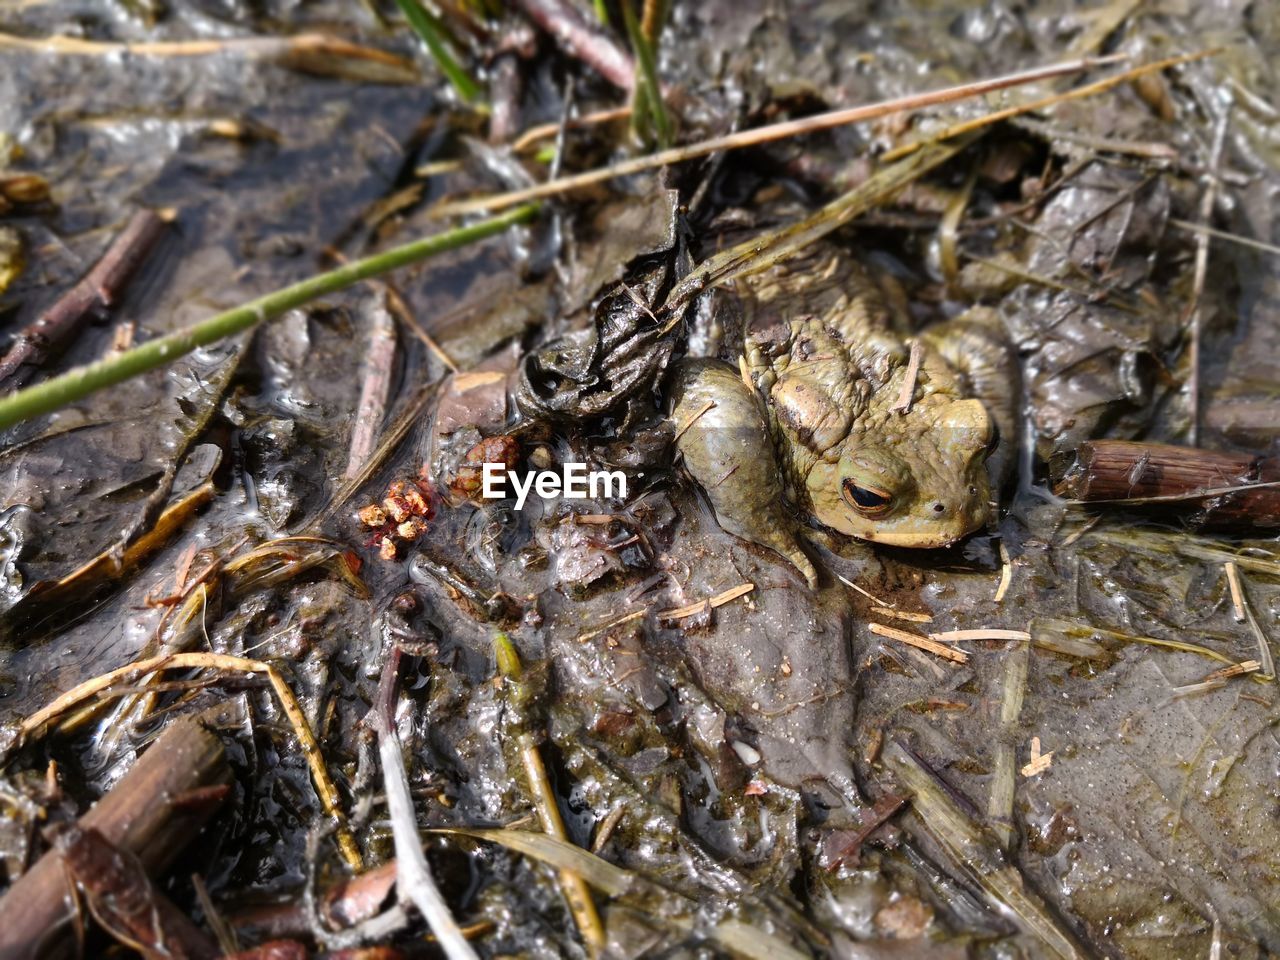 High angle view of frog in mud